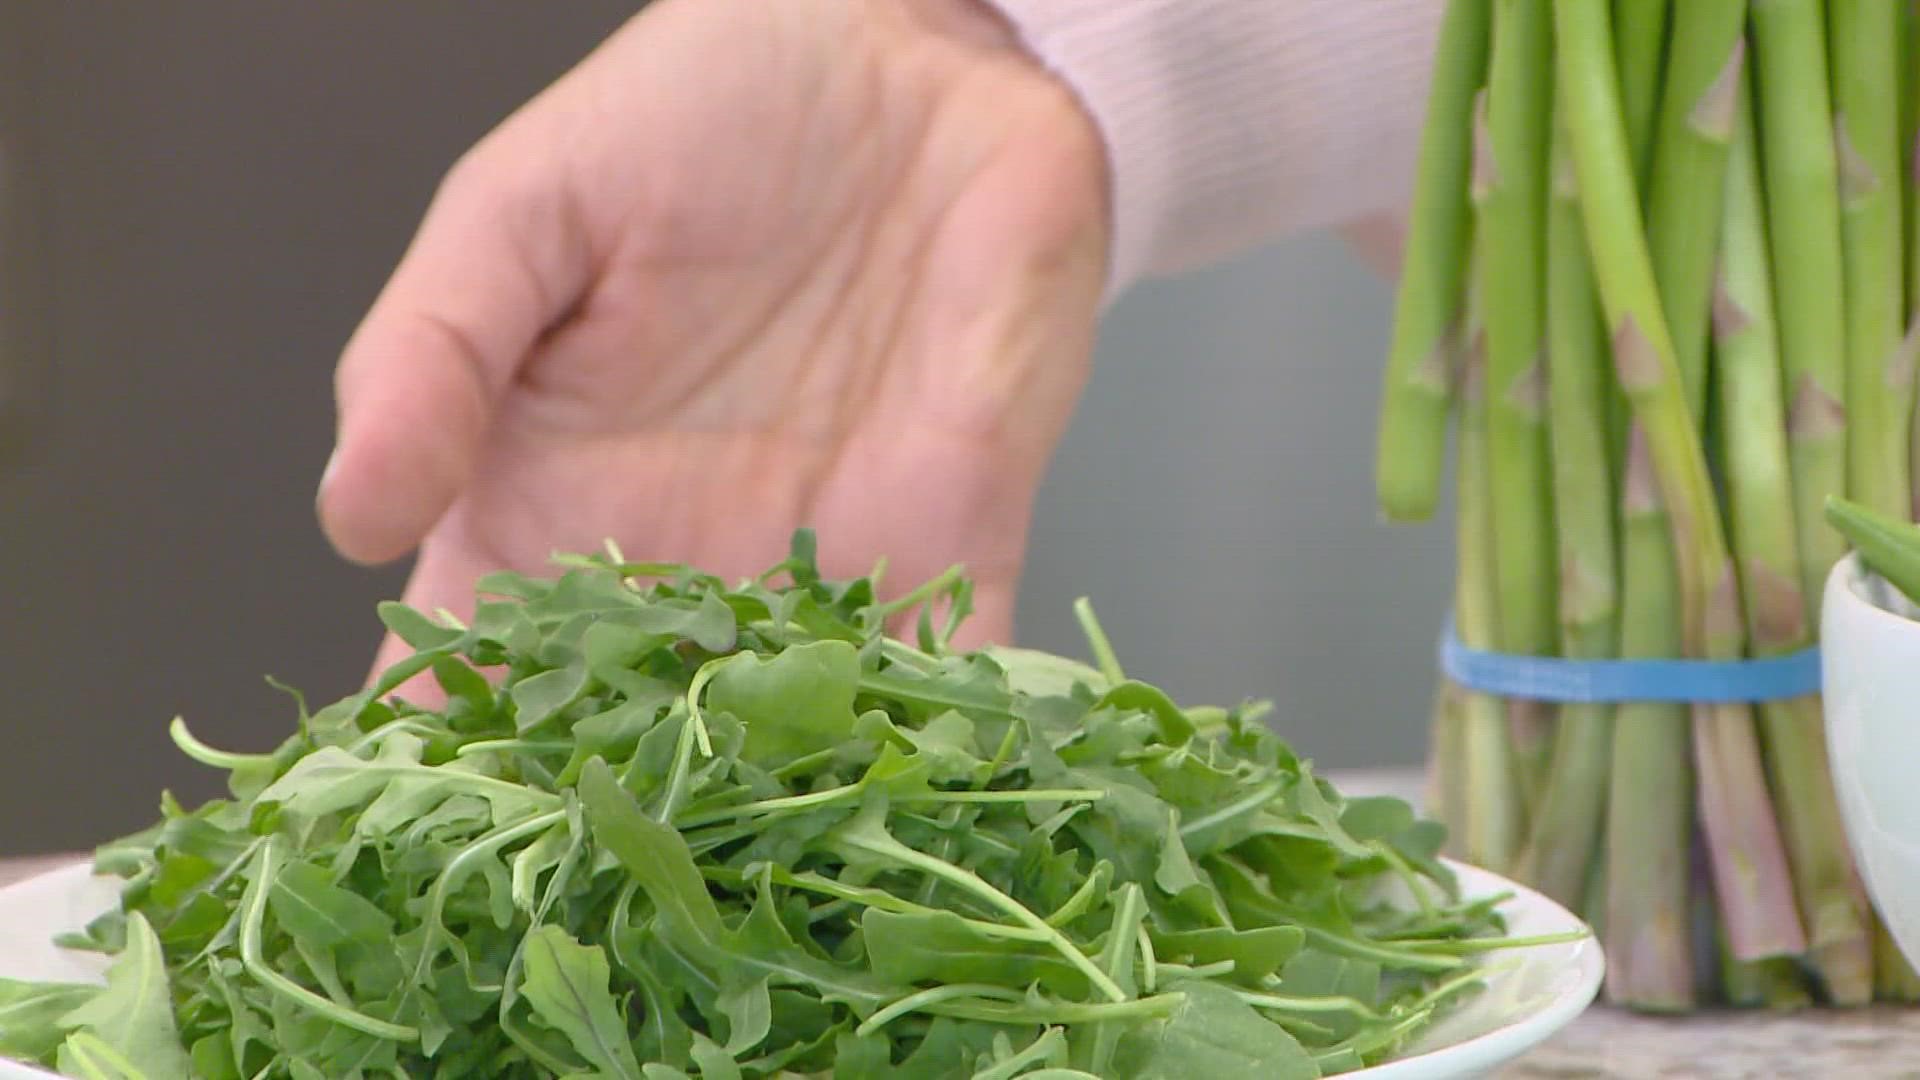 9NEWS Nutrition Expert Regina Topelson discusses veggies and herbs to incorporate into your diet this spring that are rich in vitamins and antioxidants.